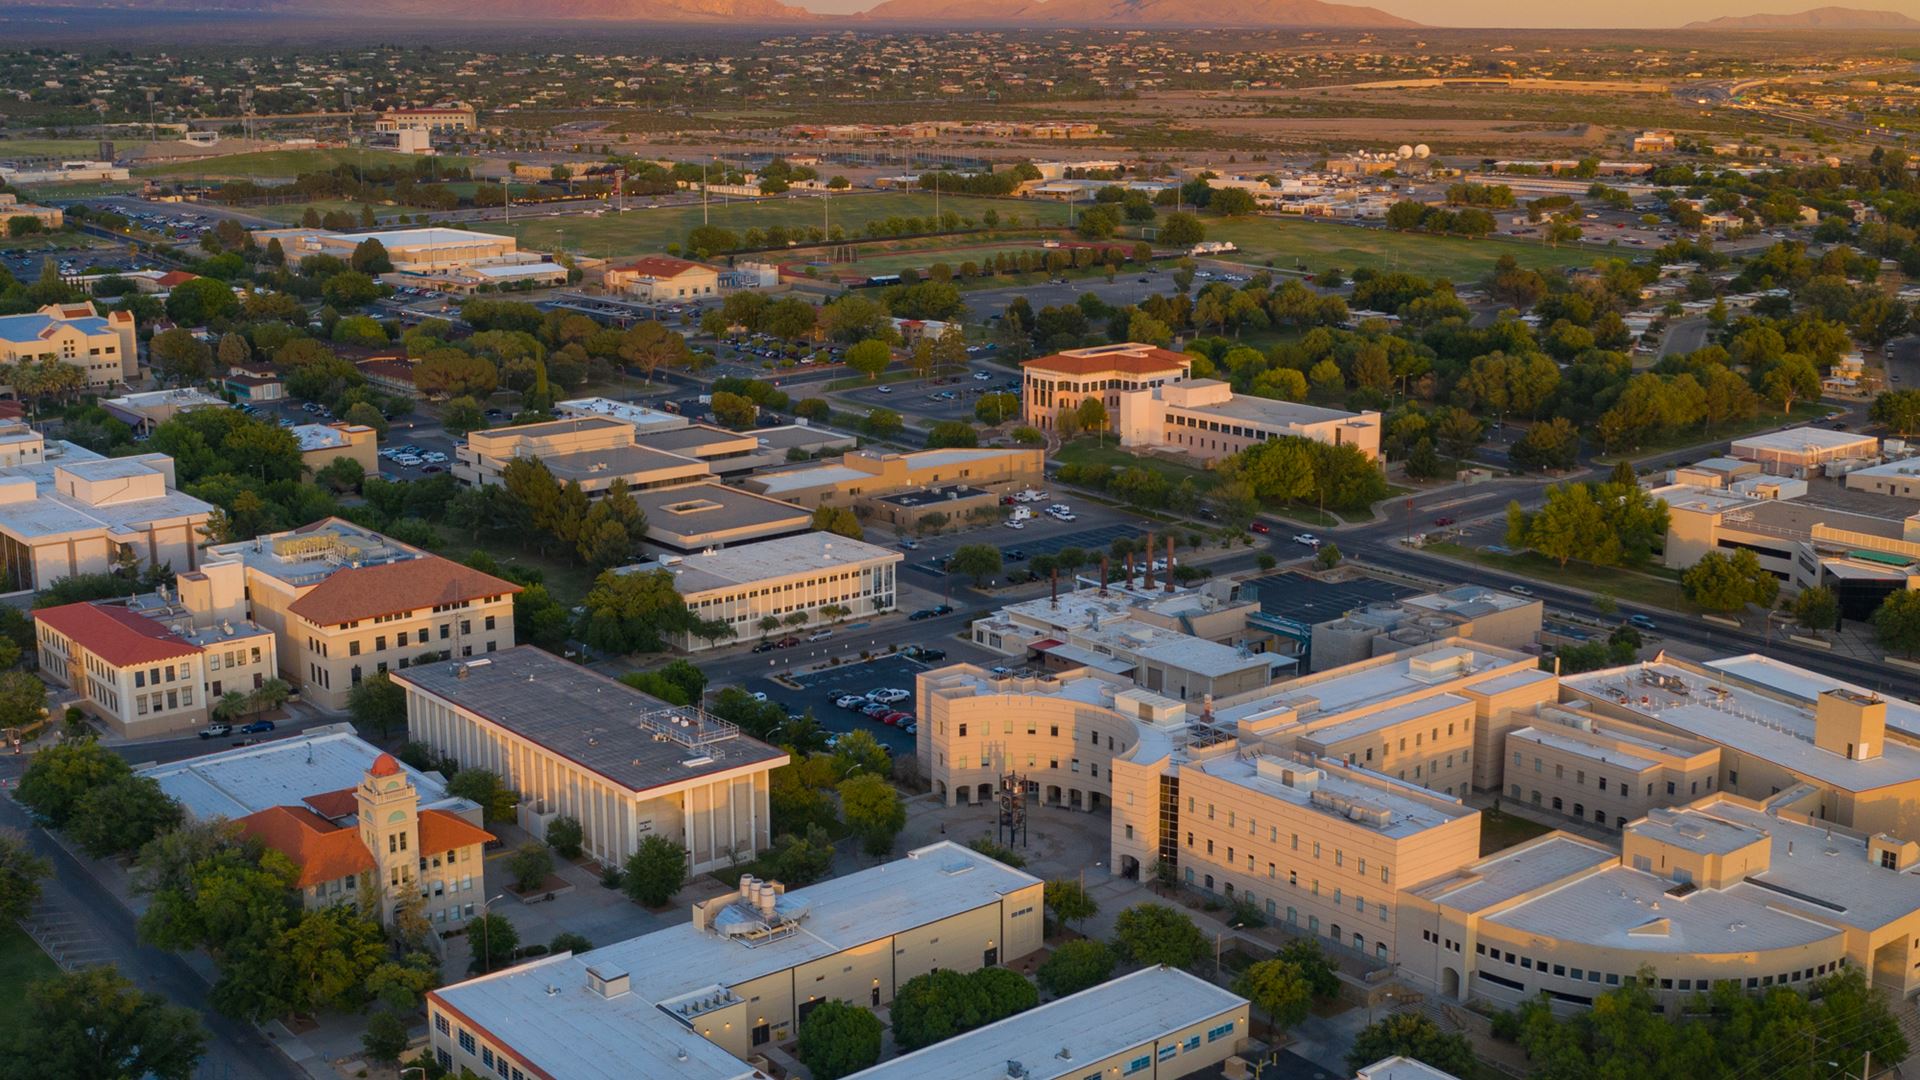 NMSU’s Physical Science Laboratory awarded new 10-year, $92.8 million contract